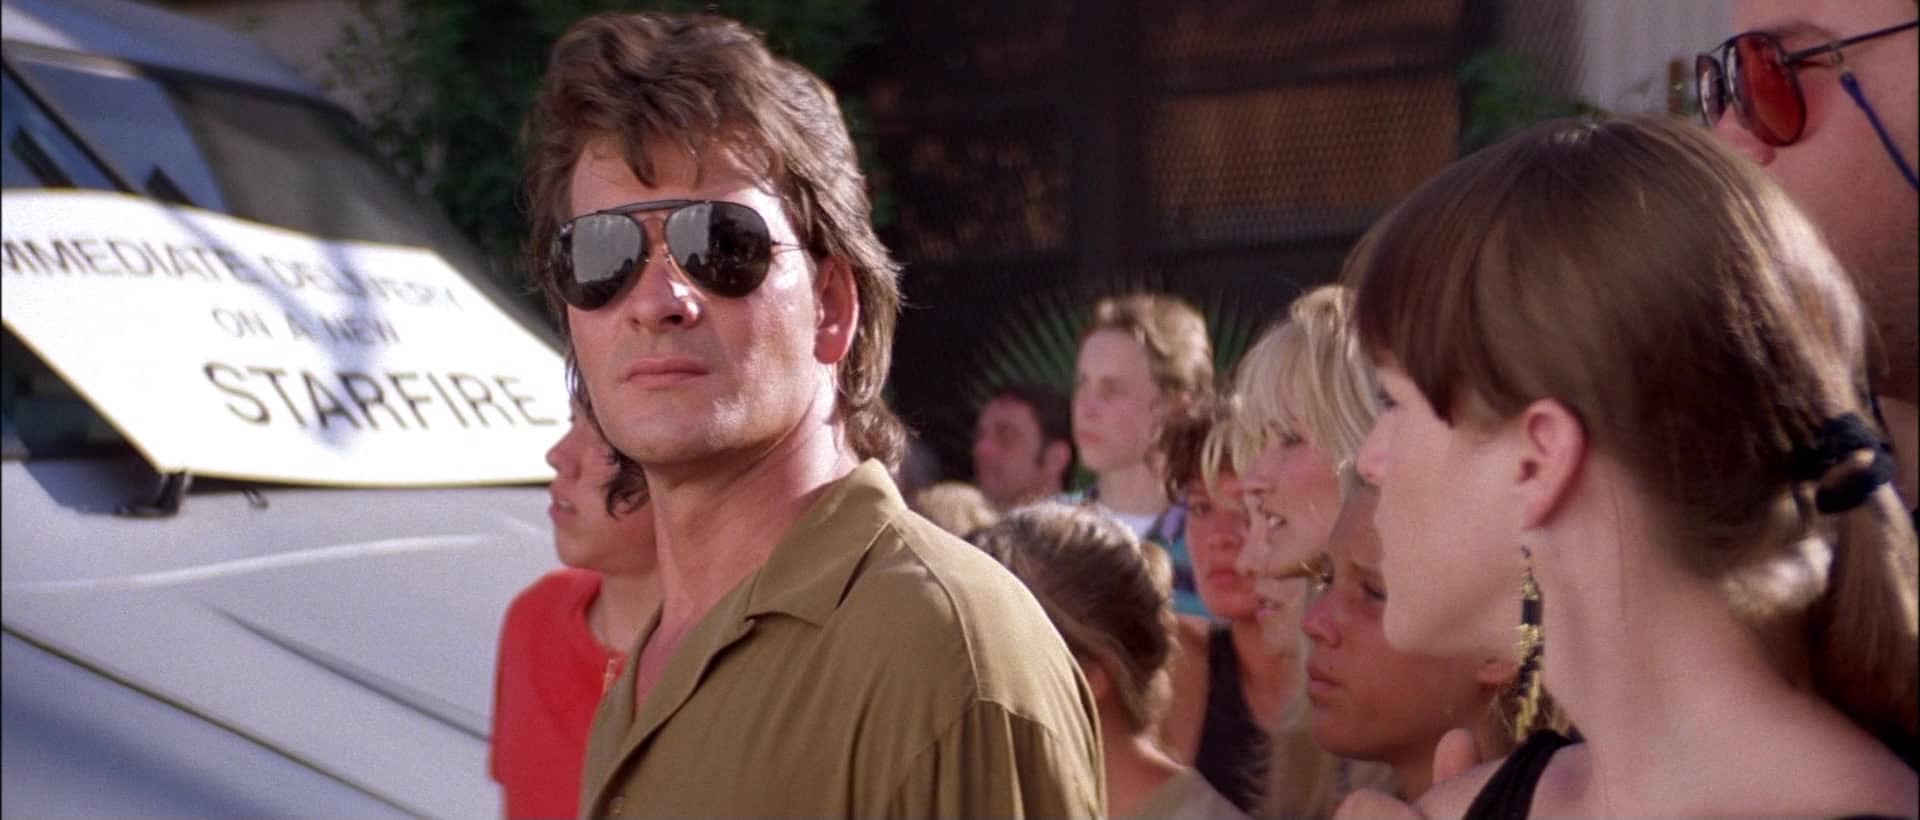 Patrick Swayze and Kathleen Wilhoite in Road House (1989)